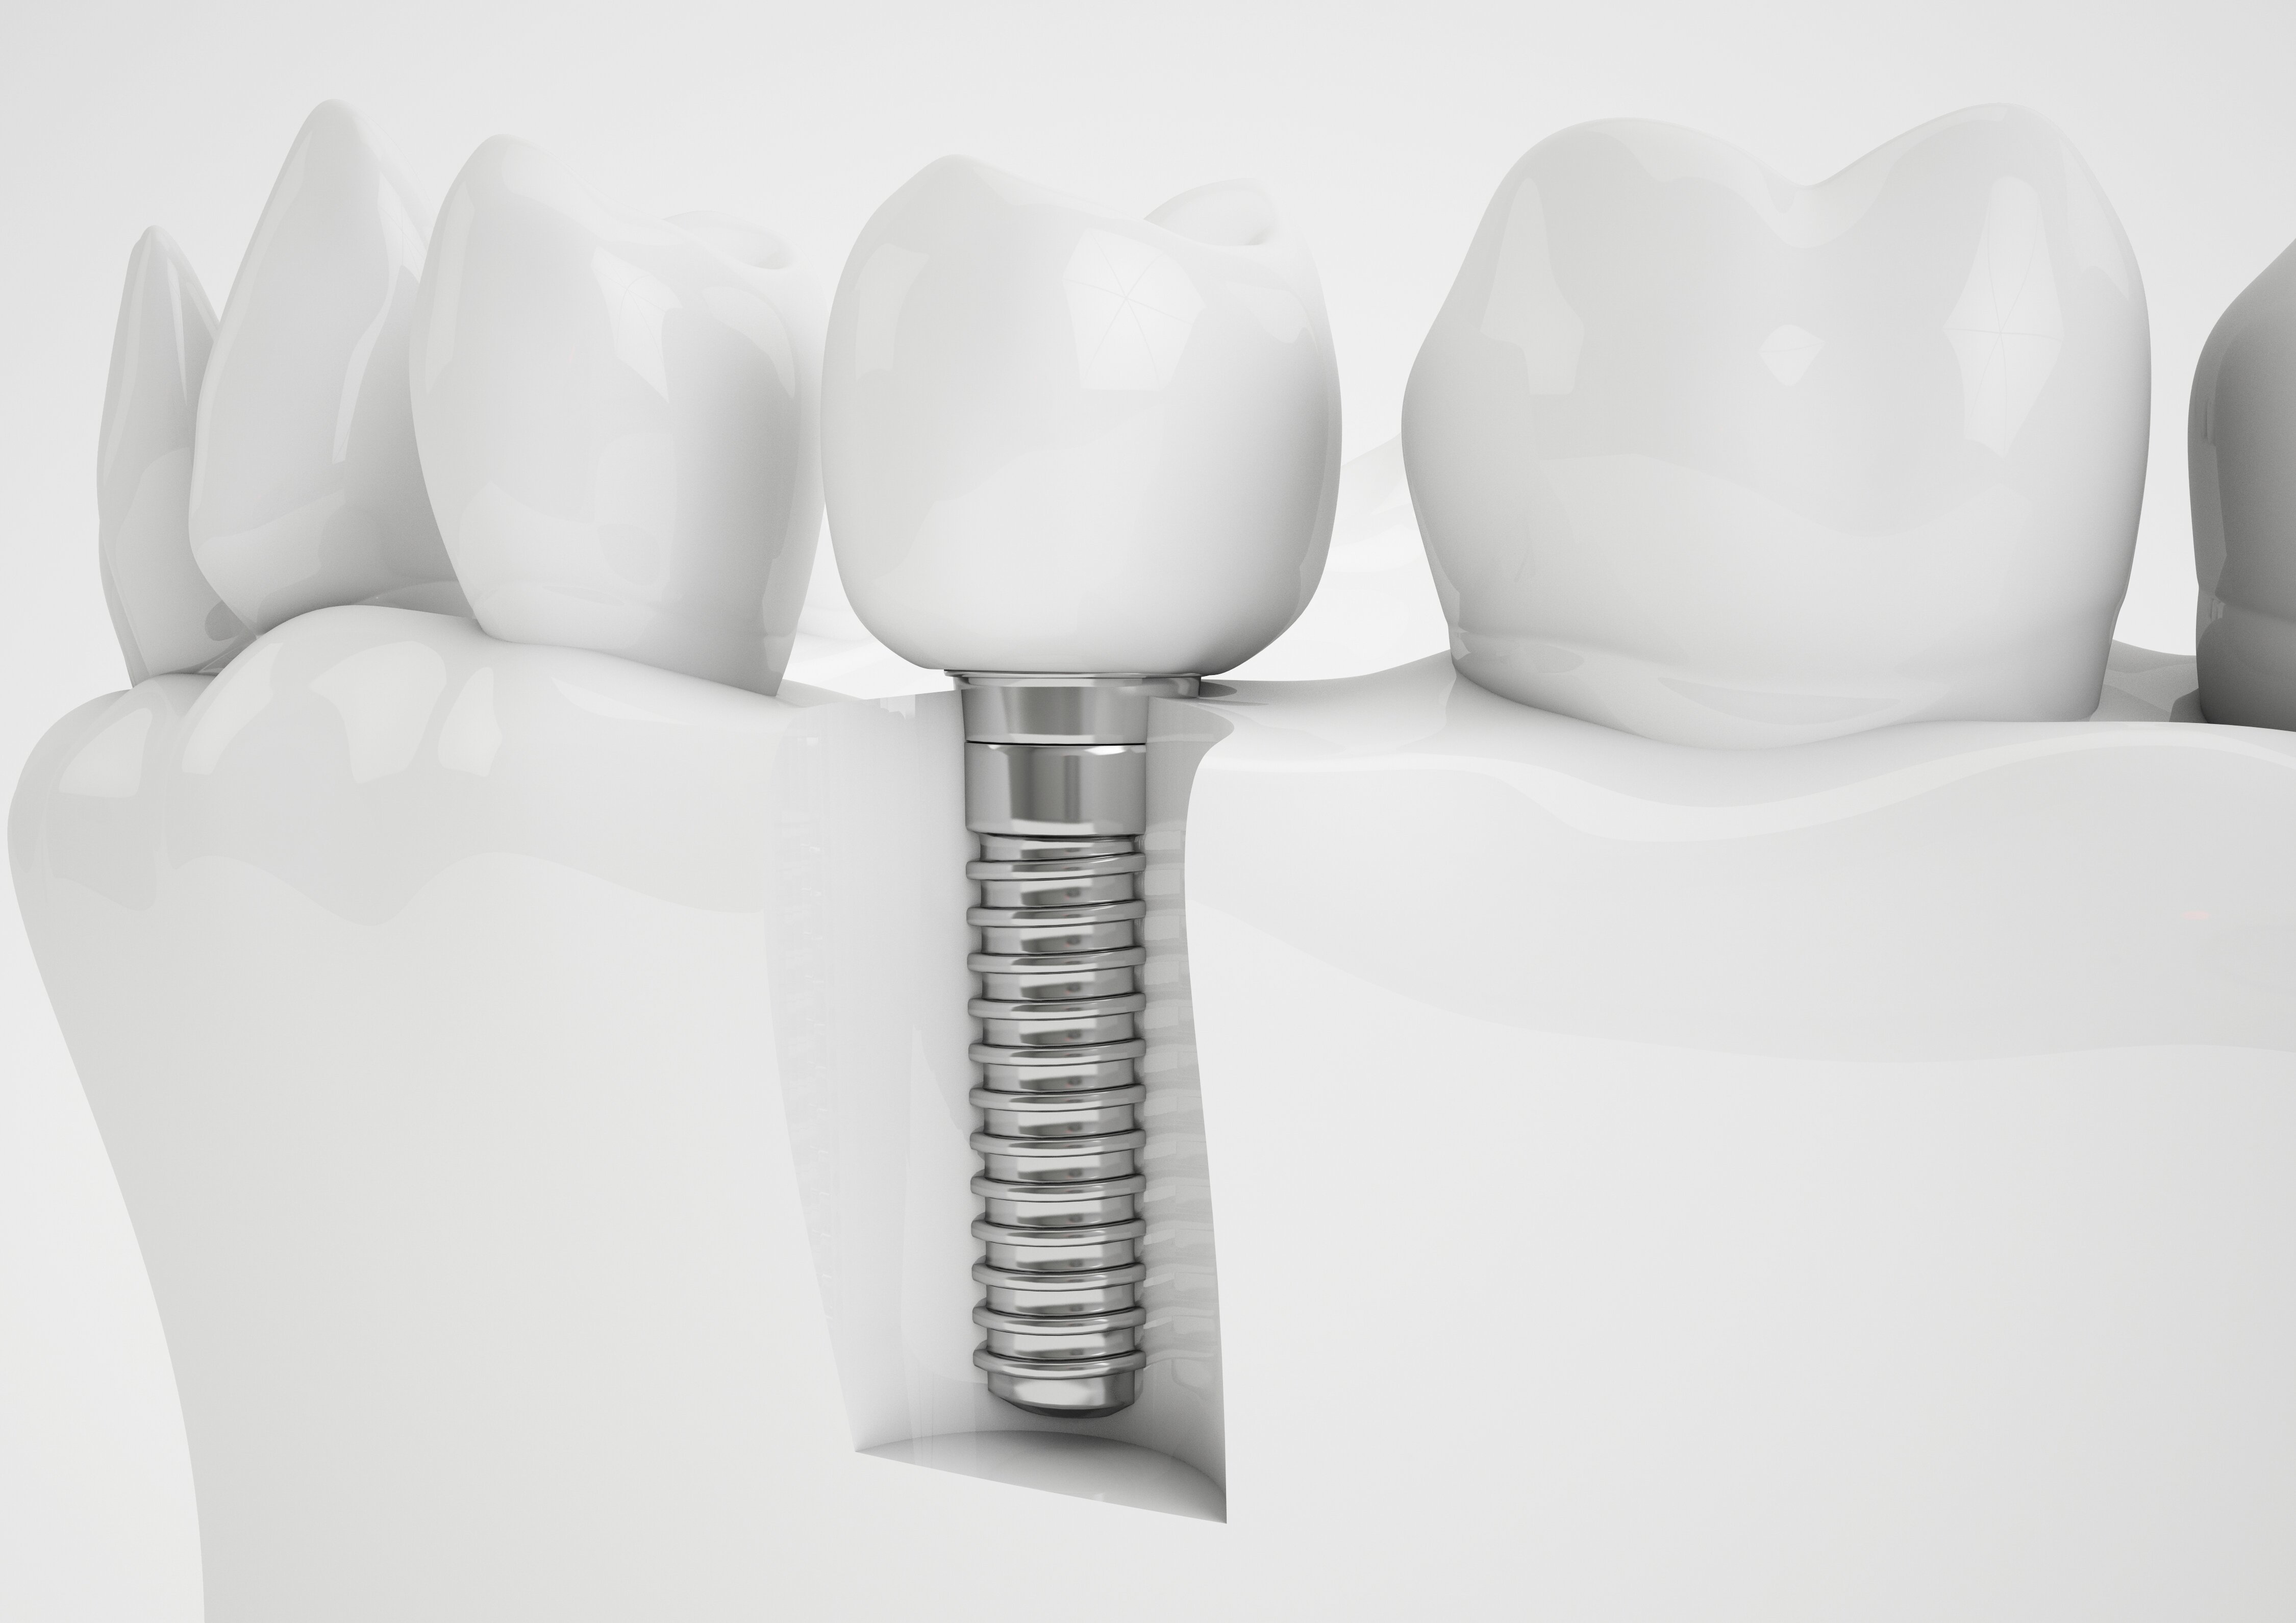 Concept of a dental implant